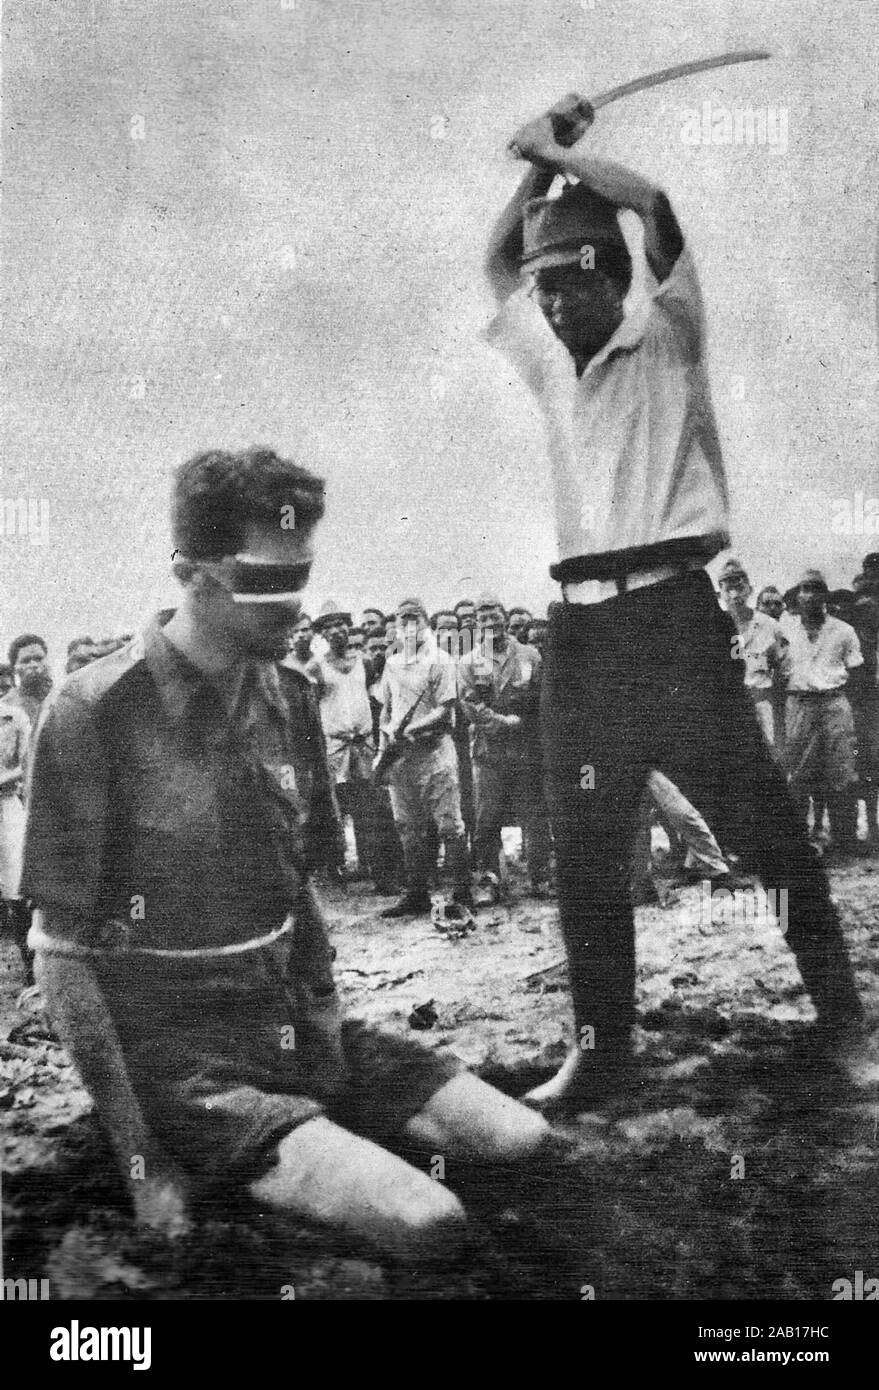 Aitape, New Guinea. 24 October 1943. A photograph found on the body of a dead Japanese soldier showing NX143314 Sergeant (Sgt) Leonard G. Siffleet of 'M' Special Unit, wearing a blindfold and with his arms tied, about to be beheaded with a sword by Yasuno Chikao. The execution was ordered by Vice Admiral Kamada, the commander of the Japanese Naval Forces at Aitape. Sgt Siffleet was captured with Private (Pte) Pattiwahl and Pte Reharin, Ambonese members of the Netherlands East Indies Forces, whilst engaged in reconnaissance behind the Japanese lines. Yasuno Chikao died before the end of the war Stock Photo